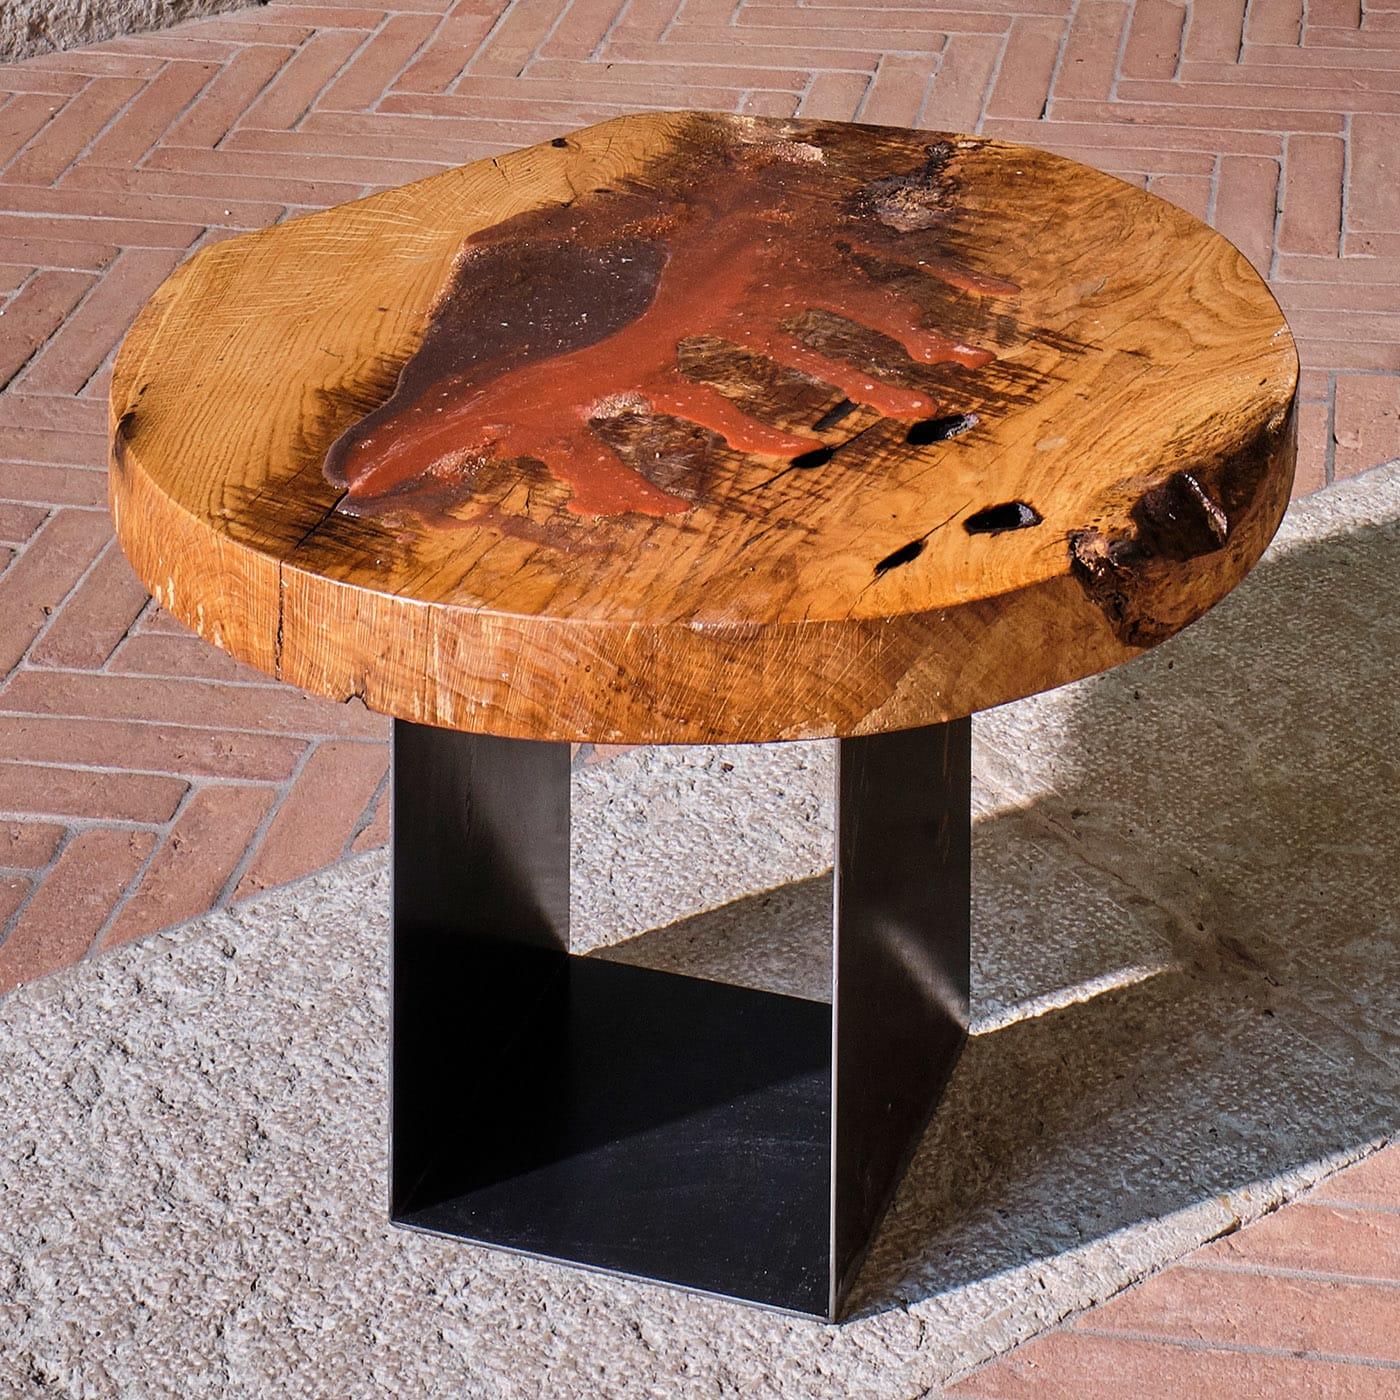 Part of the AlUla Collection comprised of one-off pieces crafted and painted by hand, this stupendous coffee table features a striking sculptural top in paulownia wood, treated with resin and acrylic to enhance its natural allure. The iron base